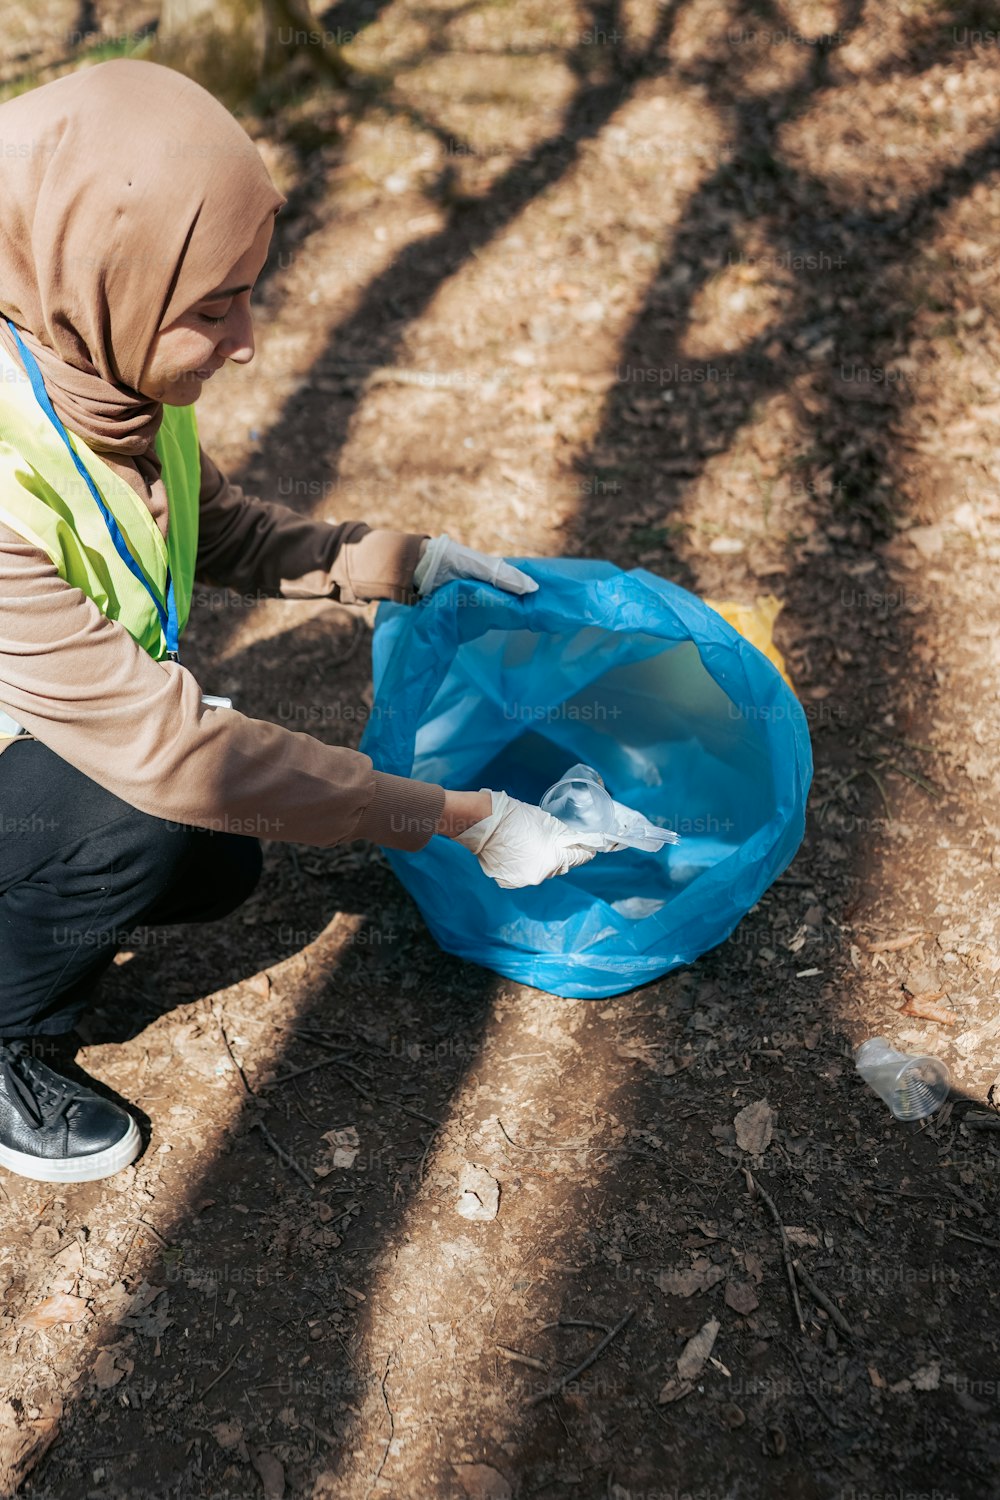 a woman in a hijab is cleaning a plastic bag